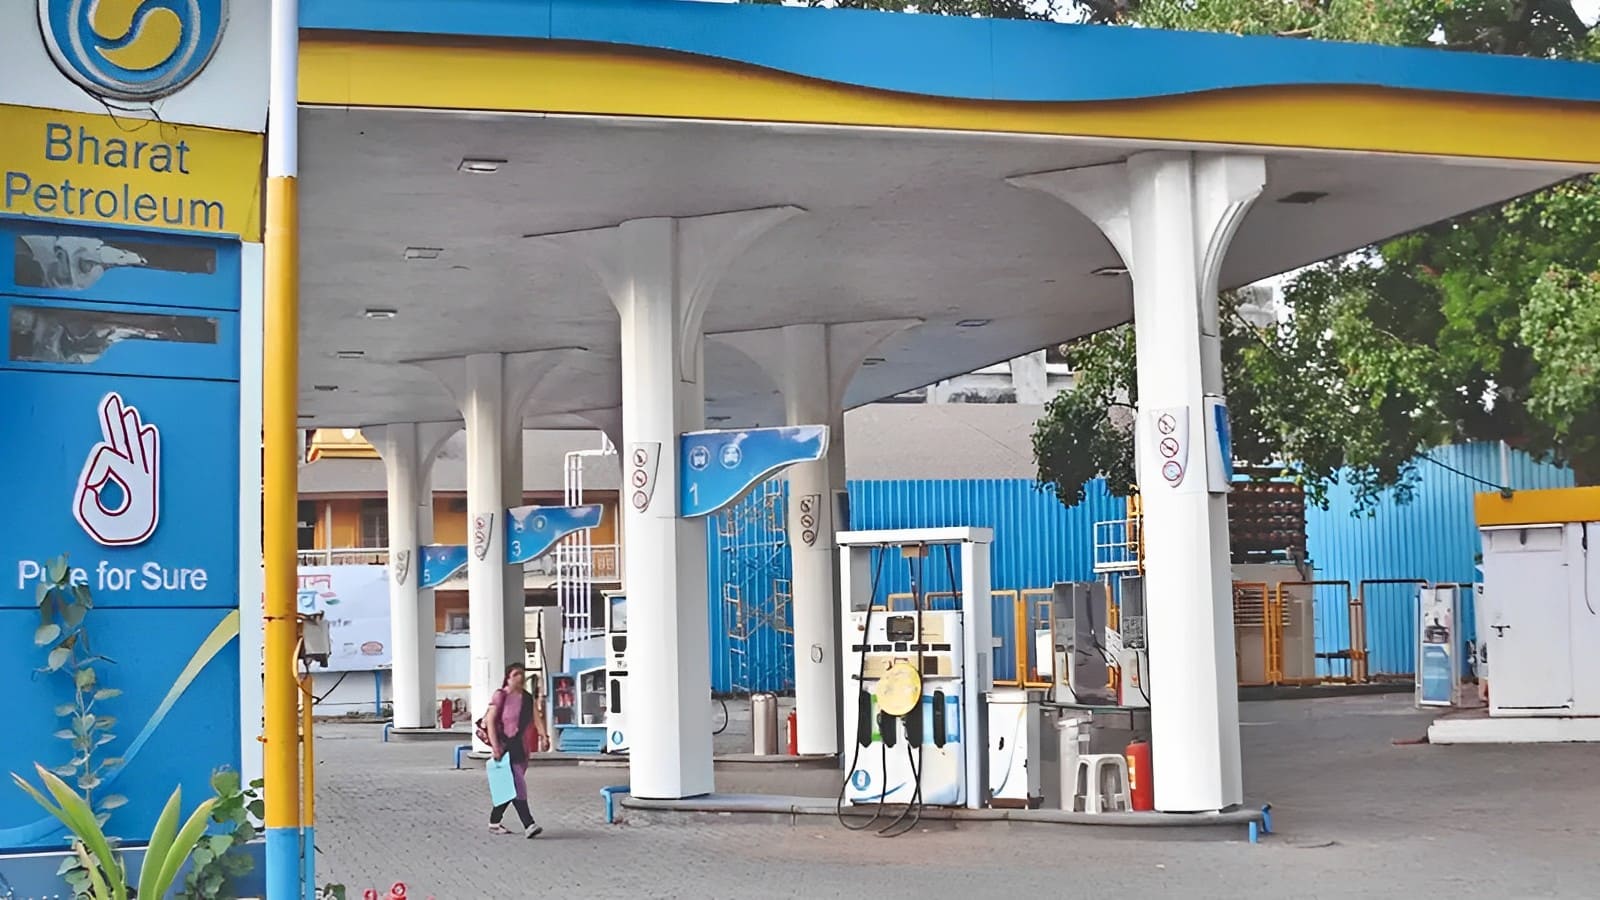 BPCL board to discuss fundraising through rights issue